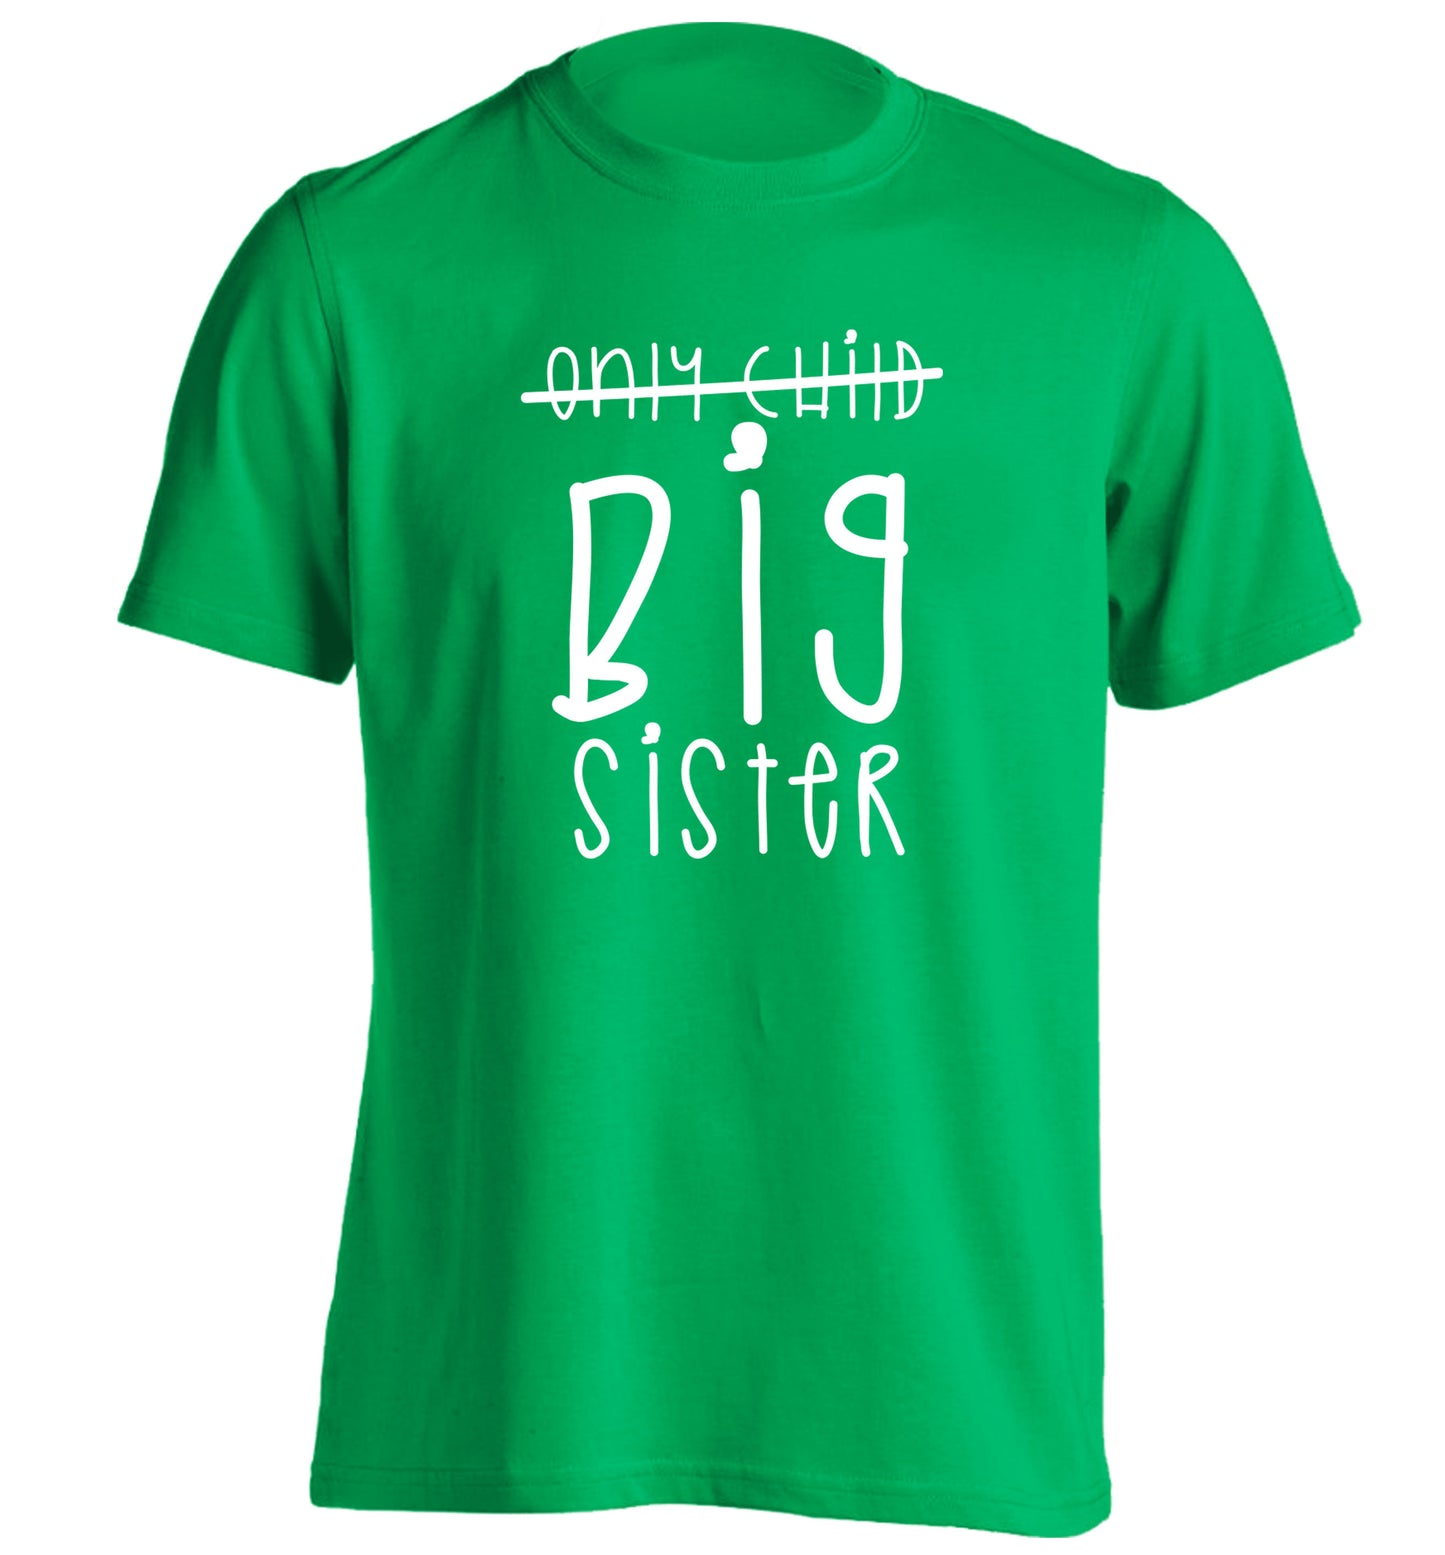 Only child big sister adults unisex green Tshirt 2XL